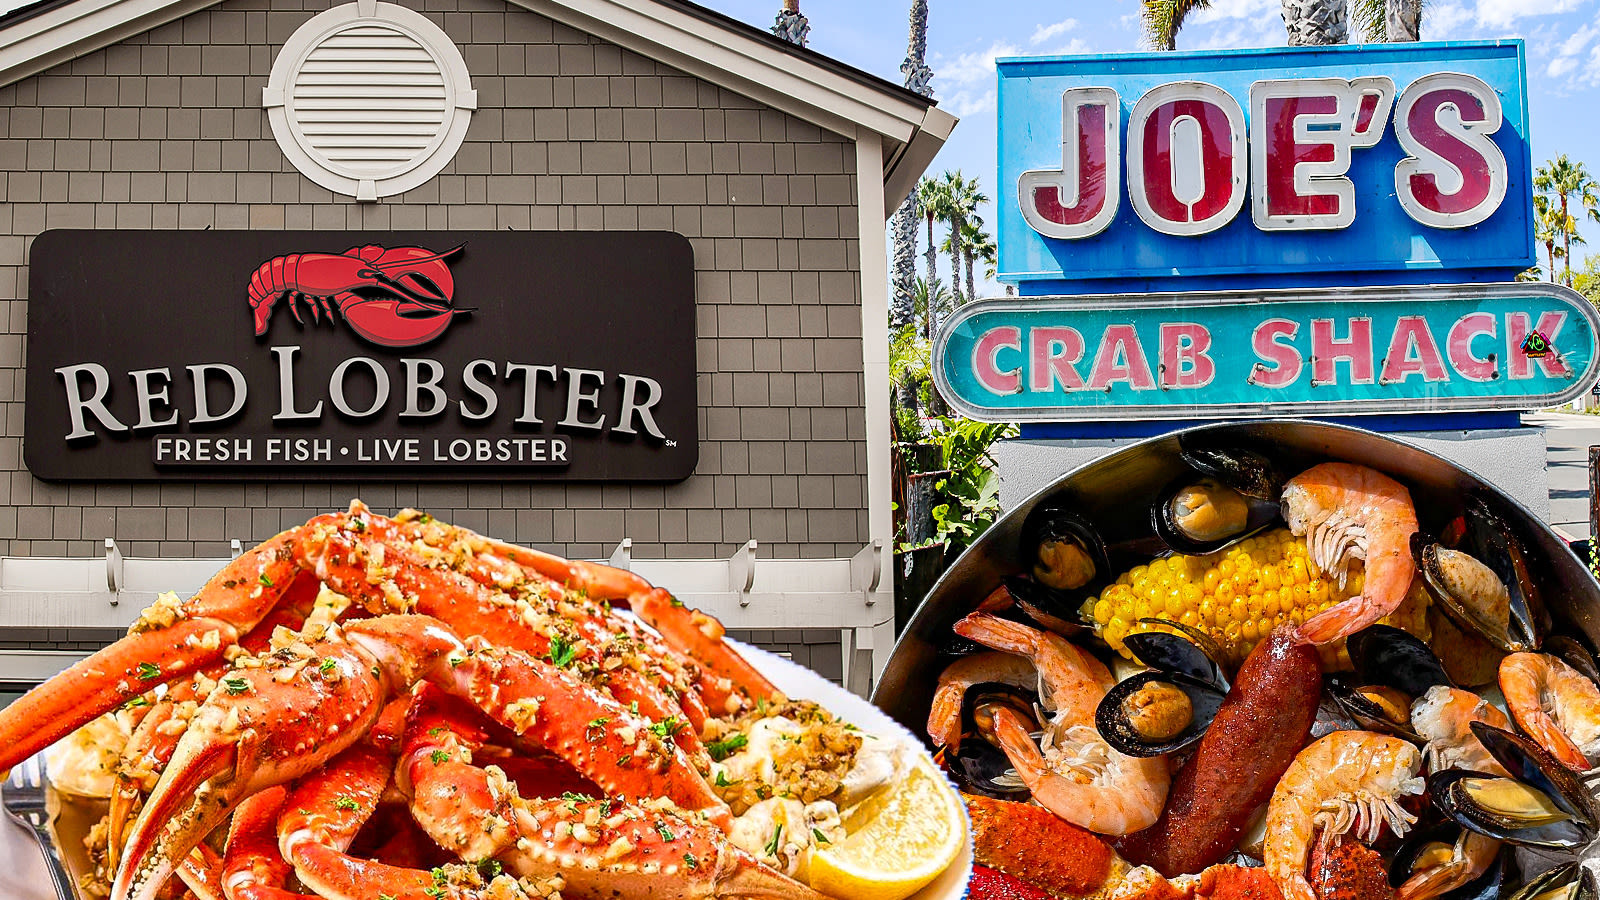 Red Lobster Vs Joe's Crab Shack: Which Chain Is Better?